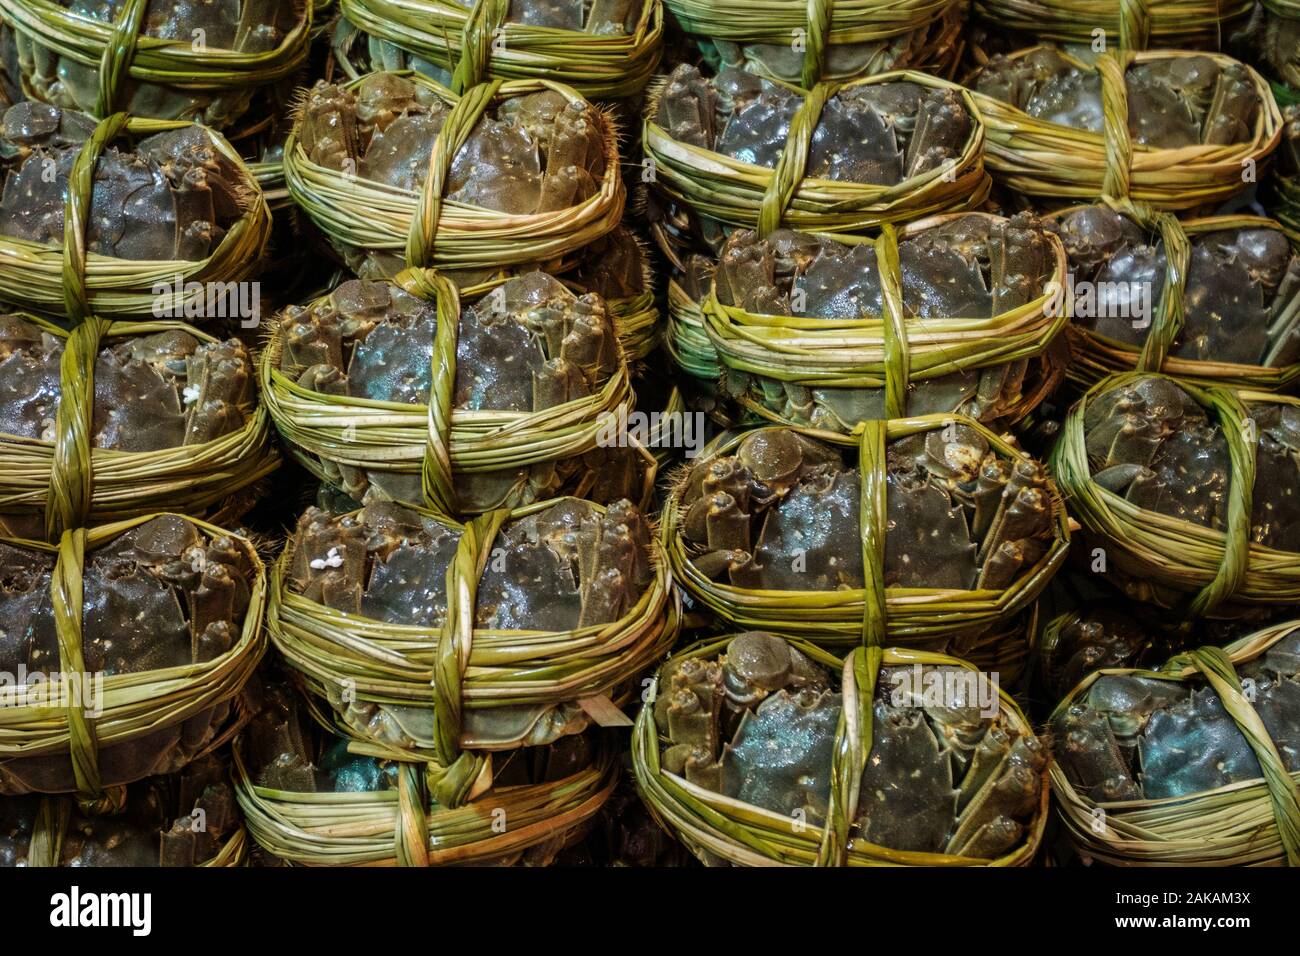 Hairy crabs for sale on seafood market, Hongkong Stock Photo